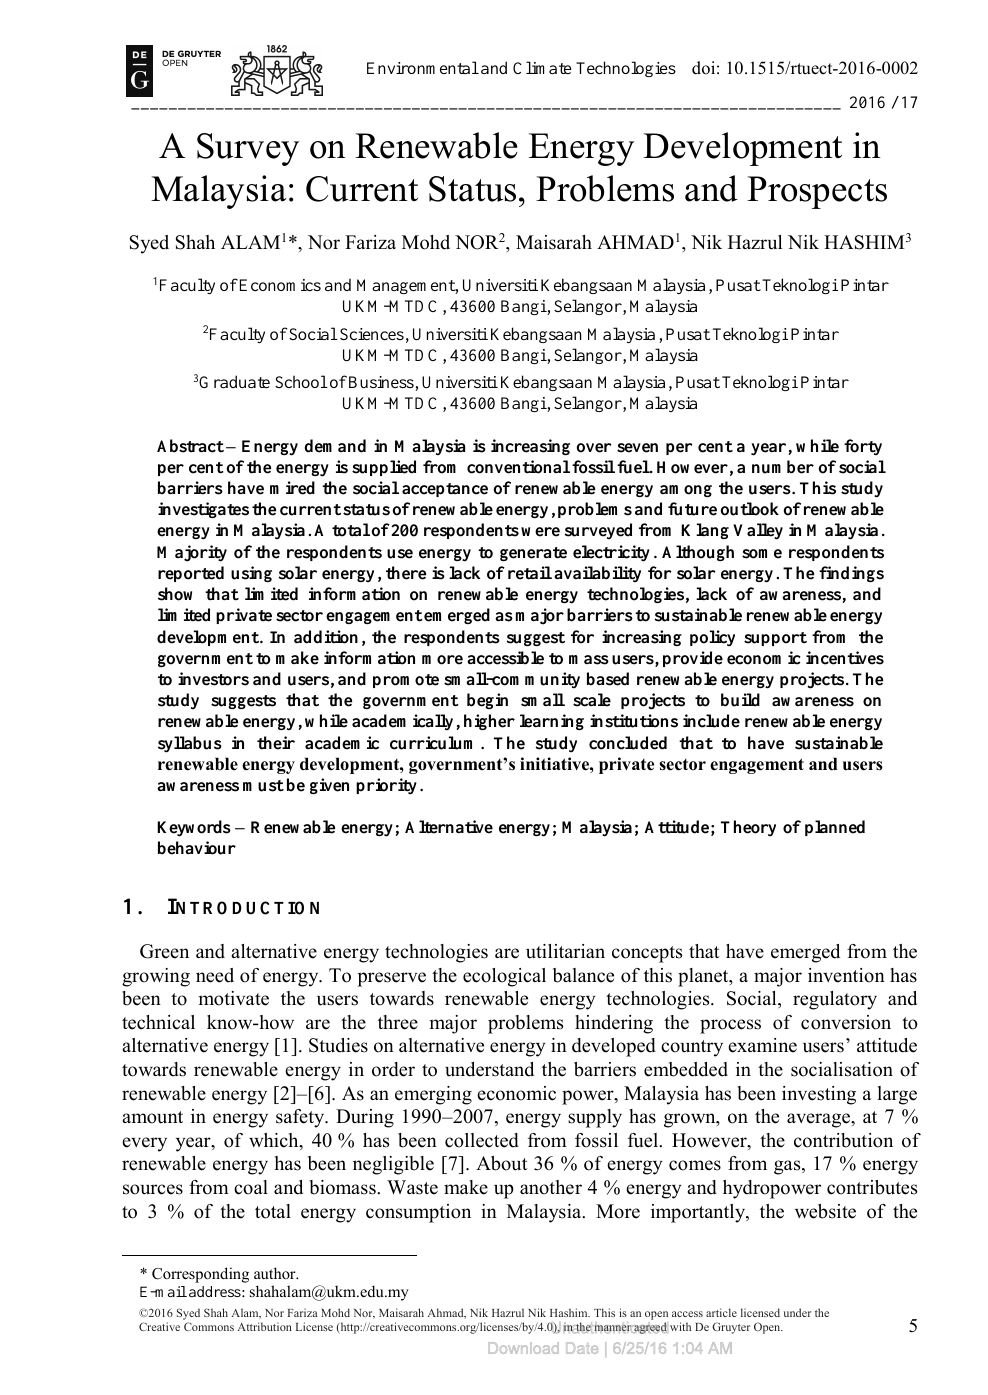 A Survey On Renewable Energy Development In Malaysia Current Status Problems And Prospects Topic Of Research Paper In Economics And Business Download Scholarly Article Pdf And Read For Free On Cyberleninka